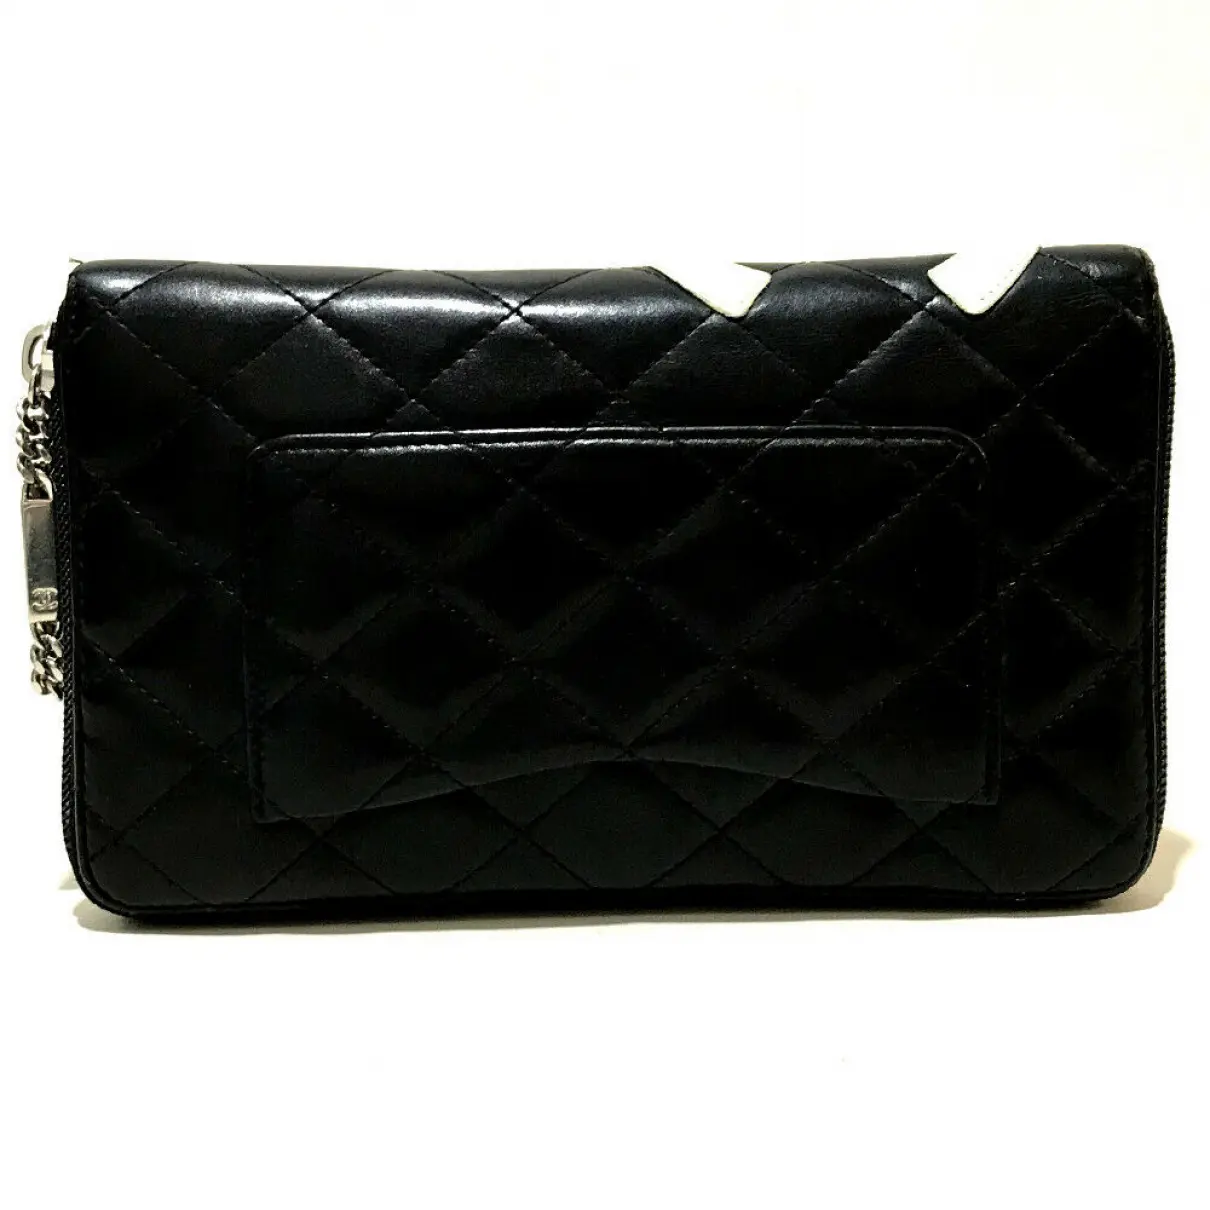 Buy Chanel Cambon leather wallet online - Vintage